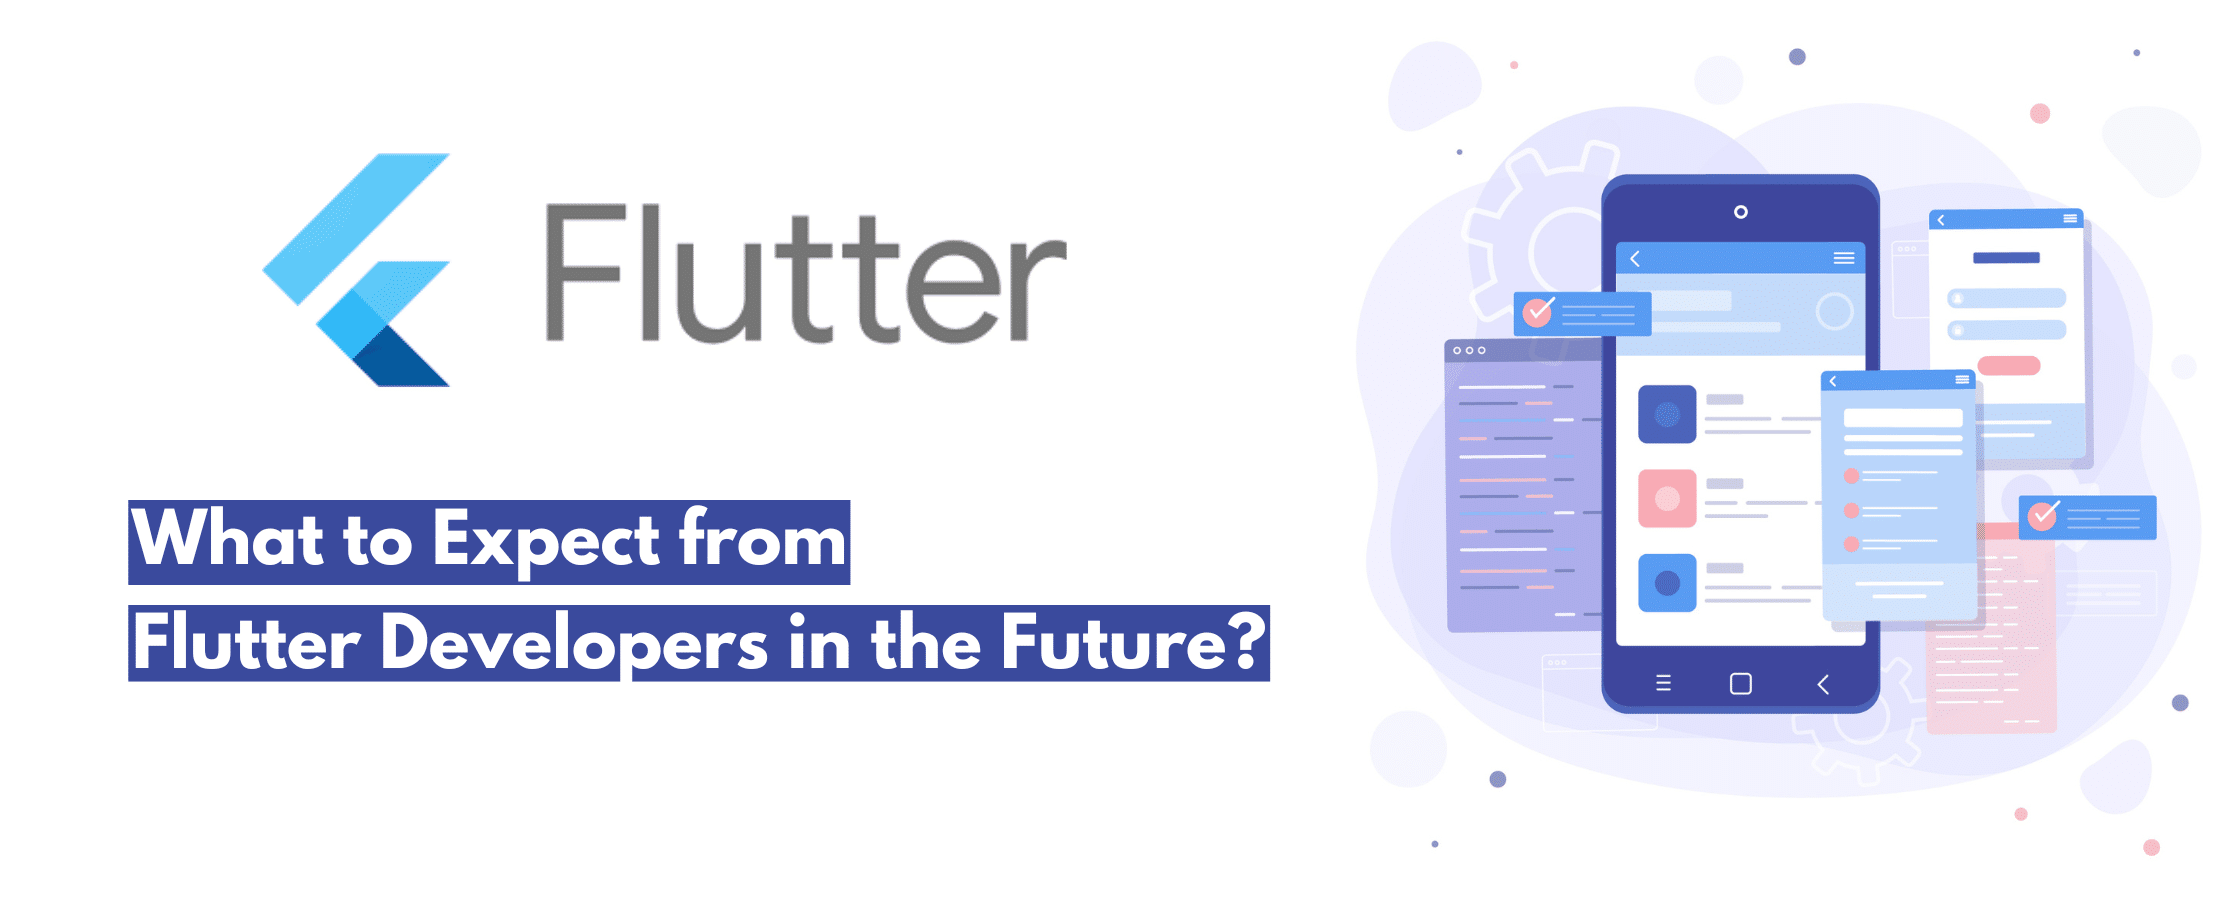 Flutter logo with text 'what to expect from flutter developers in future'